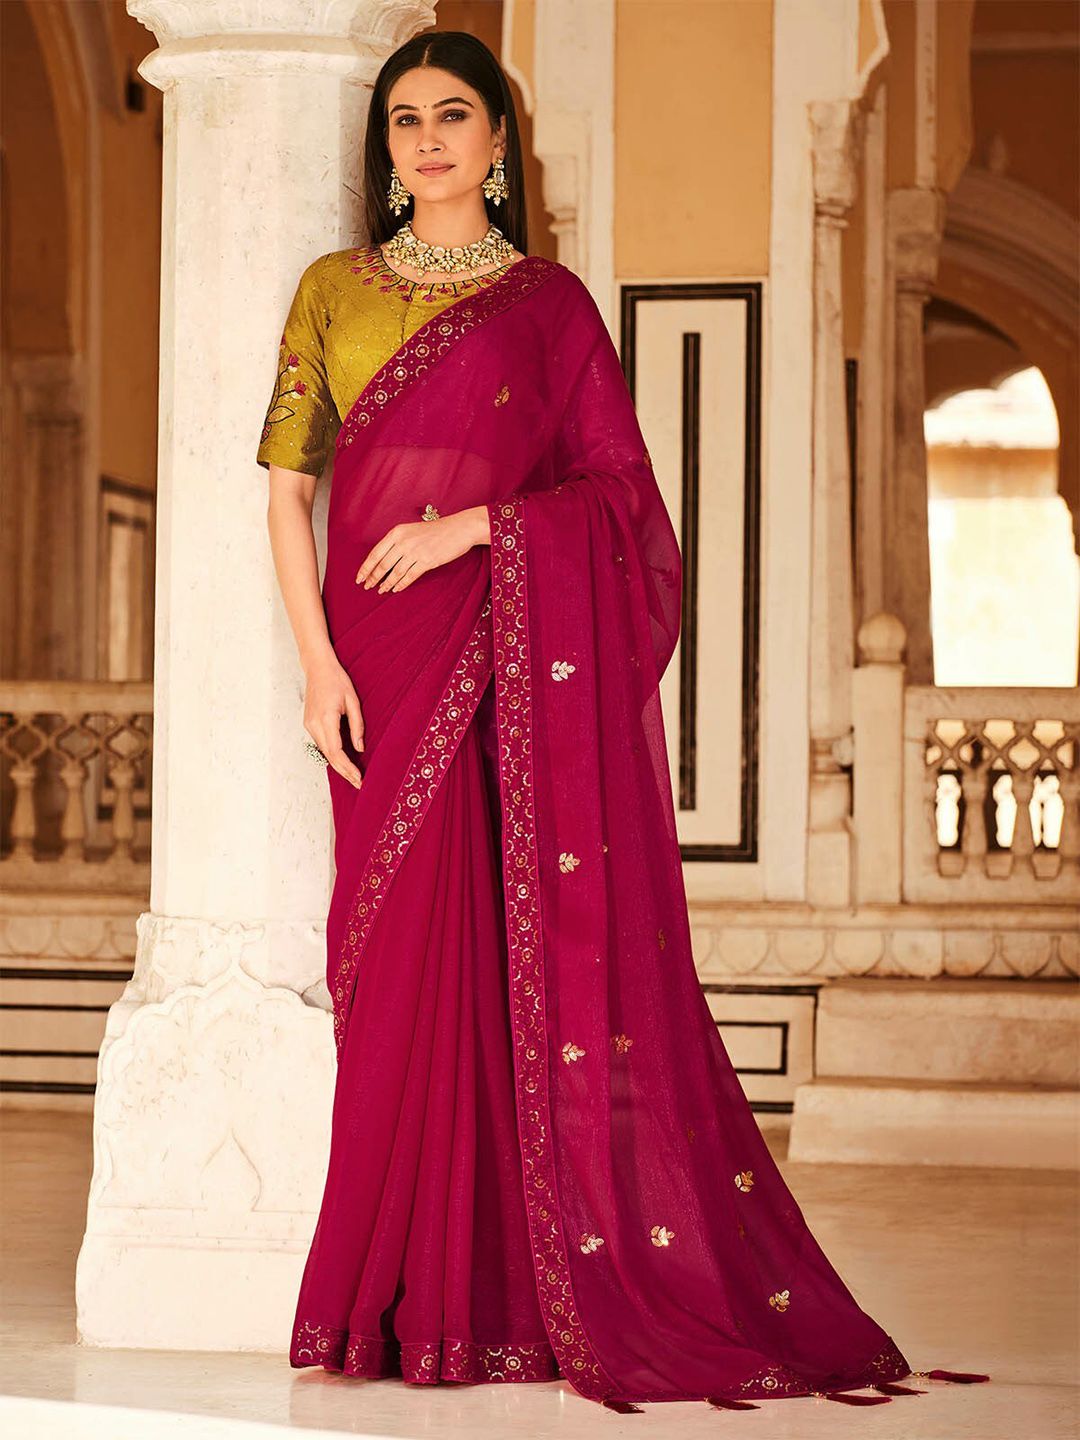 ODETTE Sequin Embellished Saree Price in India